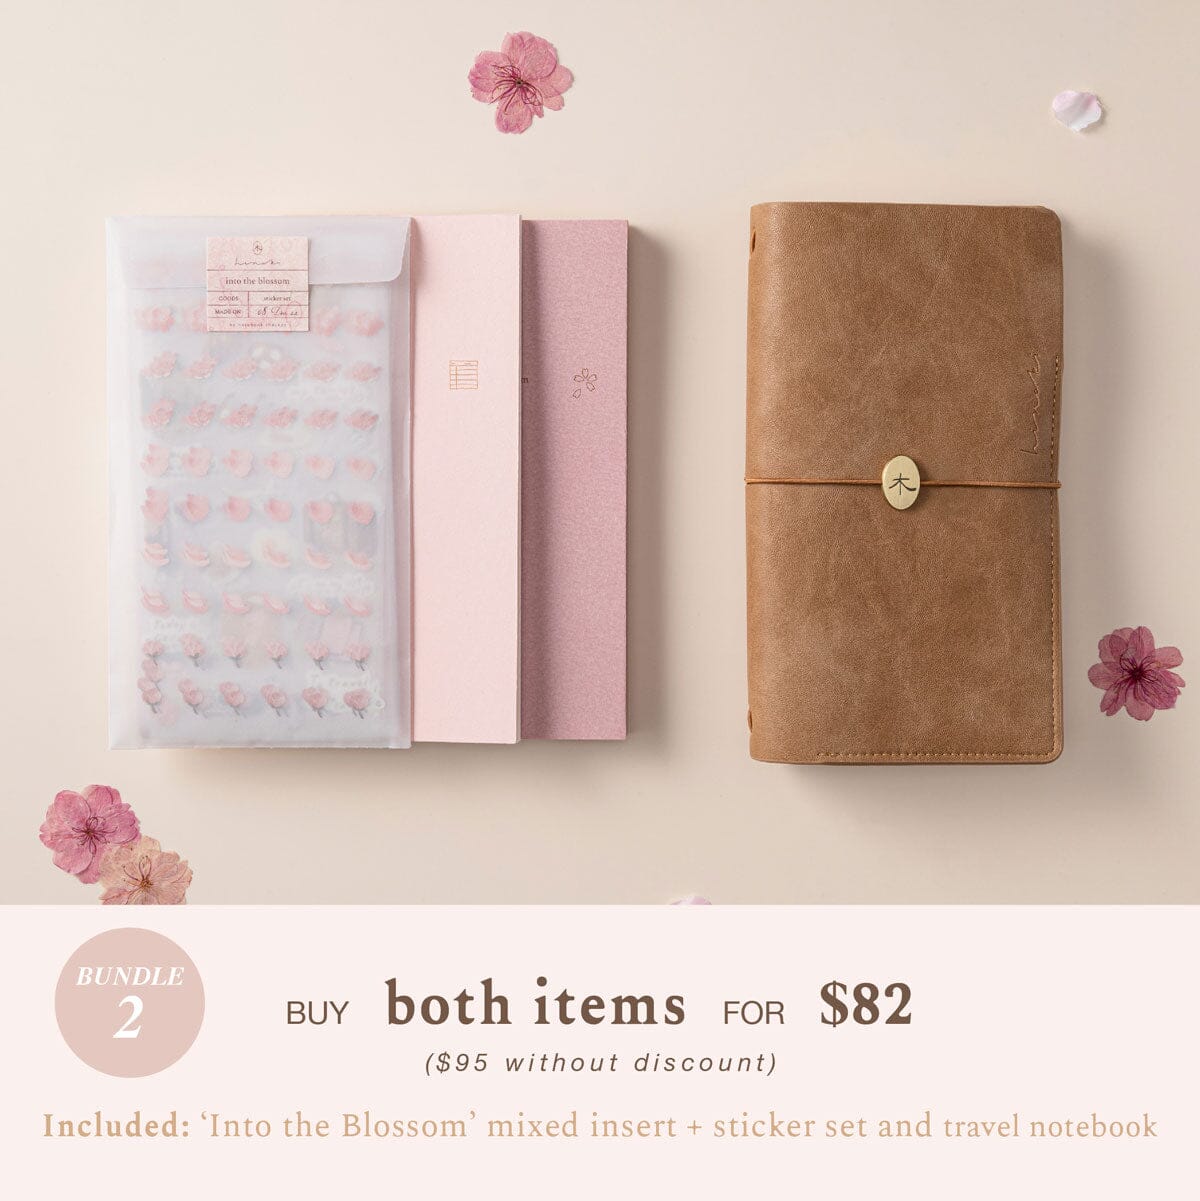 Buy both items for $75 Hinoki into the Blossom Bundle 2 including into the blossom mixed insert + sticker set and a travel notebook